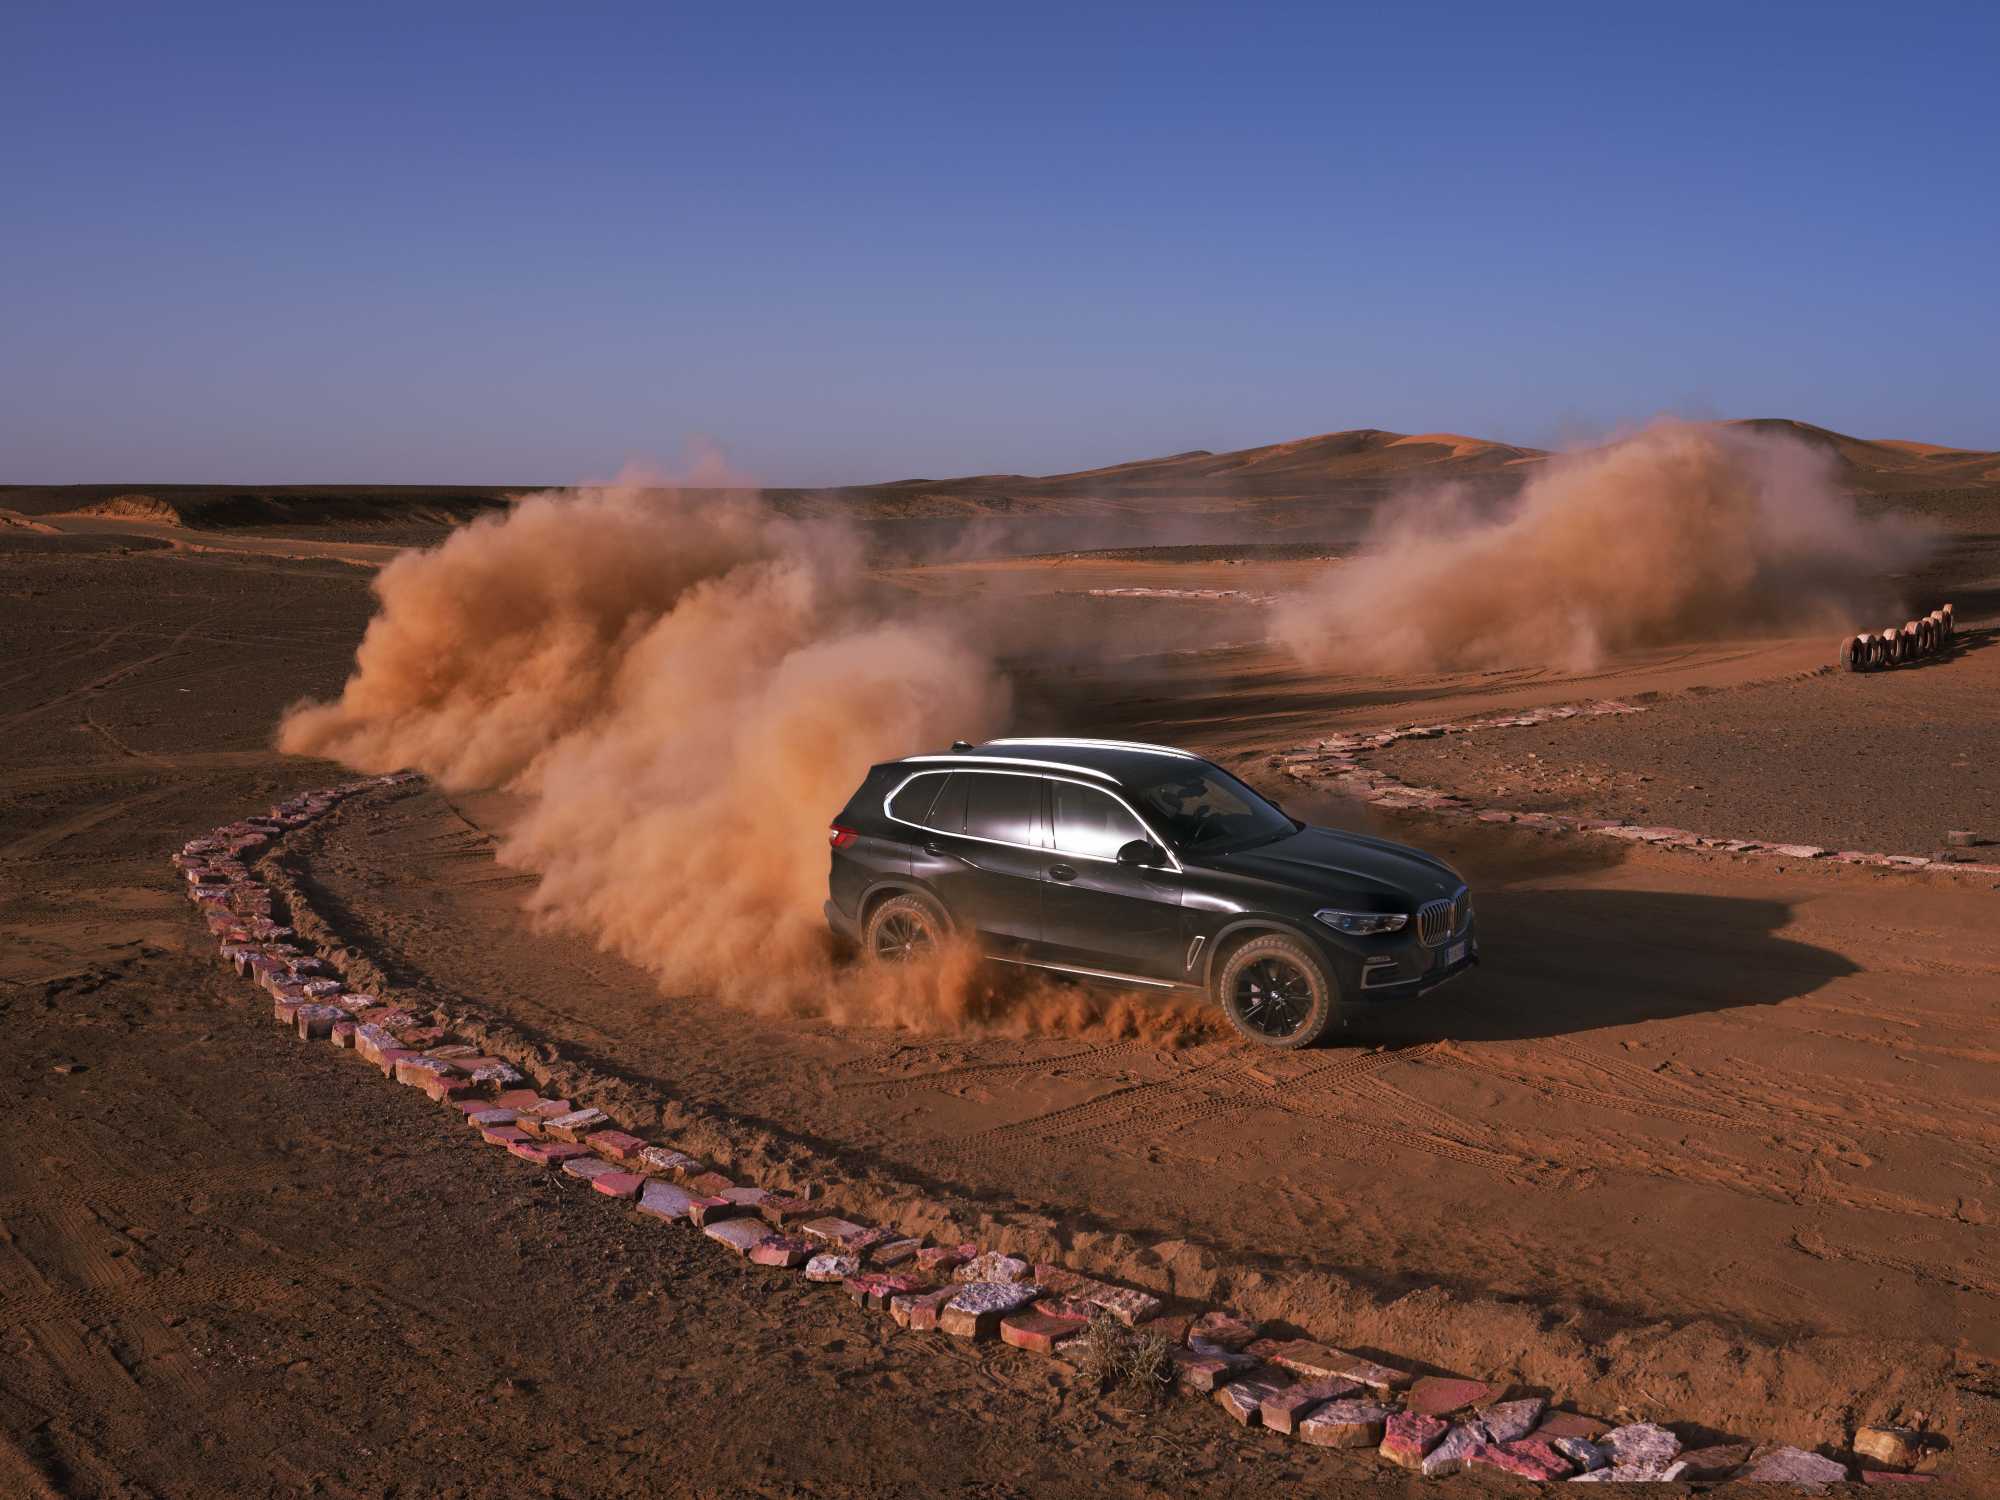 The new BMW X5 at full throttle in the bends of BMW "Monza, Sahara" (11/2018).